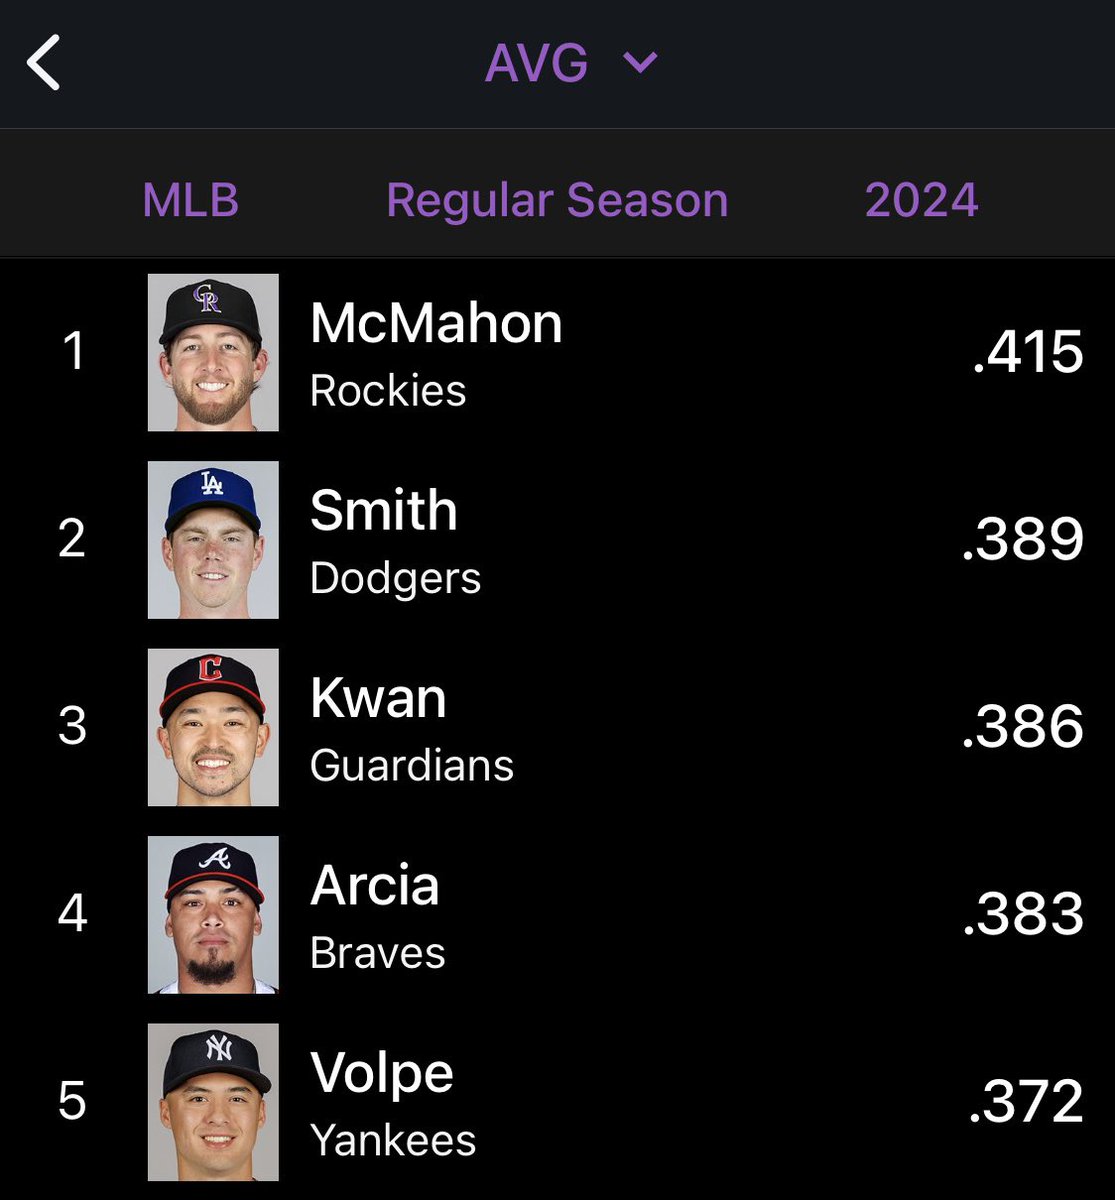 Now leading all of Major League Baseball with a .415 batting average is #Rockies Ryan McMahon.